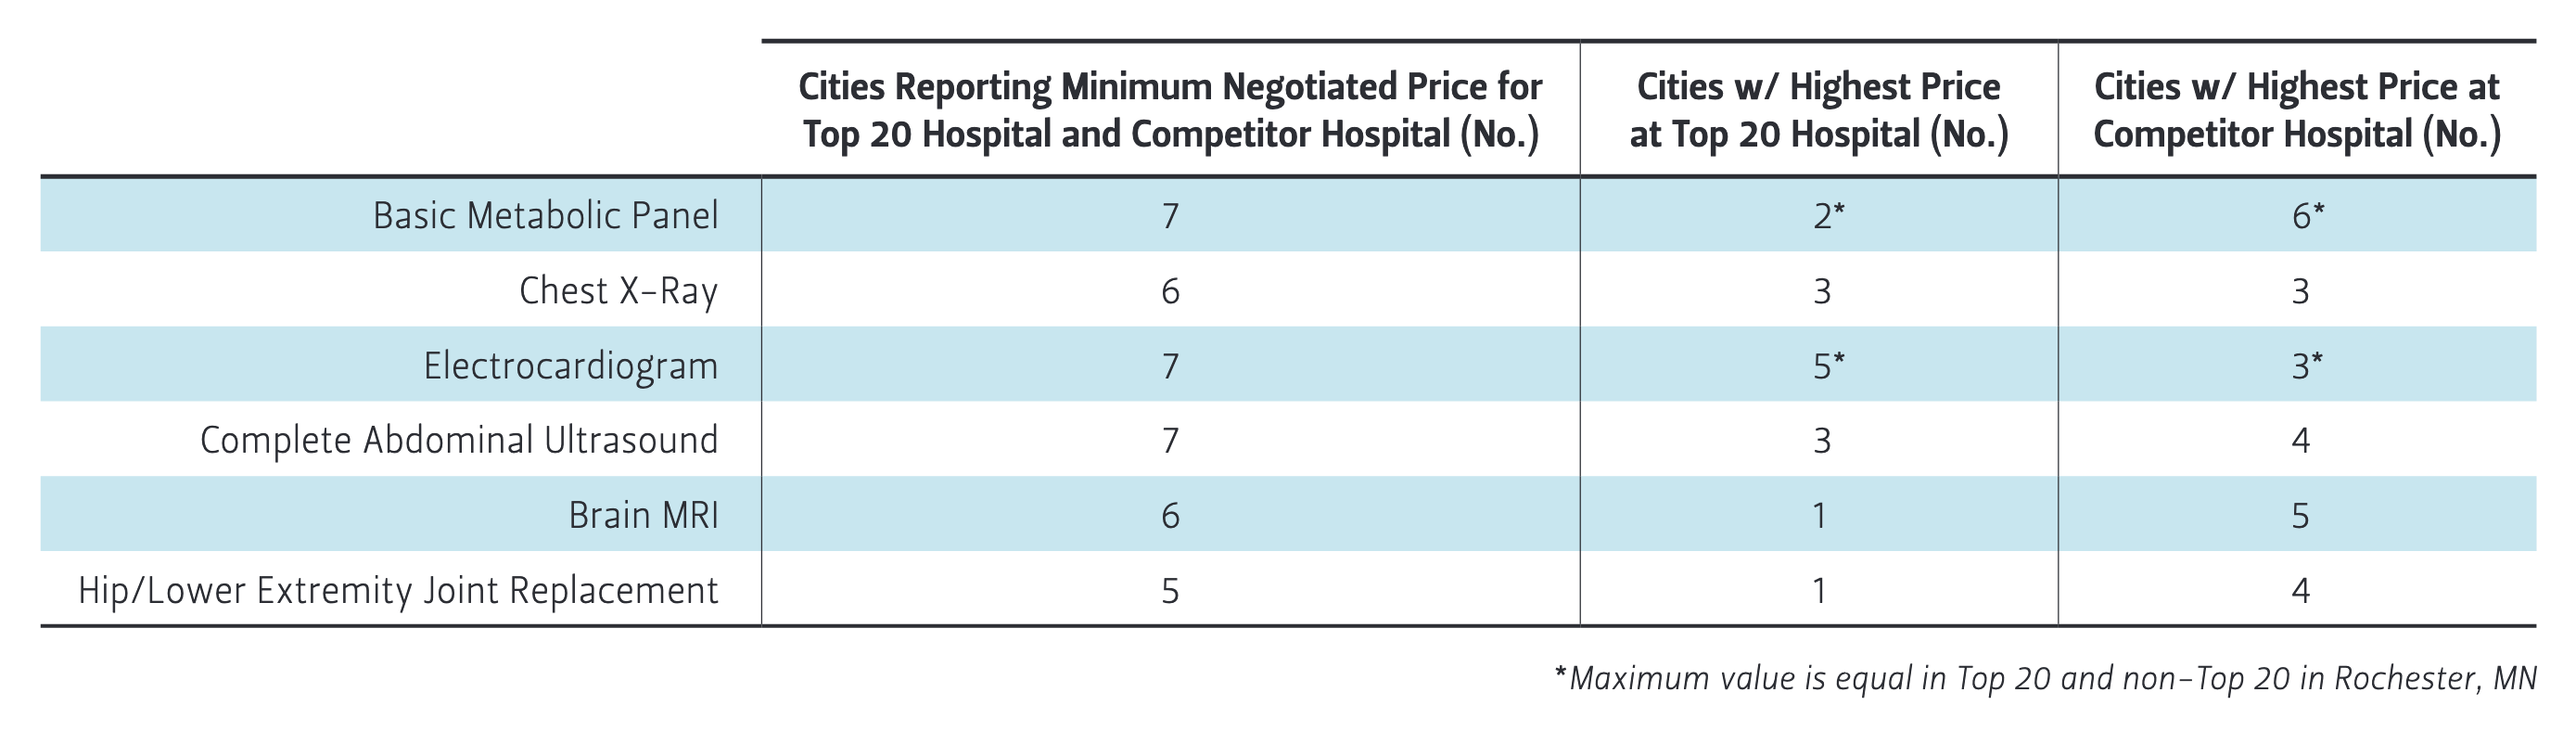 Table 1 — Cities Where Top 20 Hospital Has Highest Minimum Negotiated Price by Service